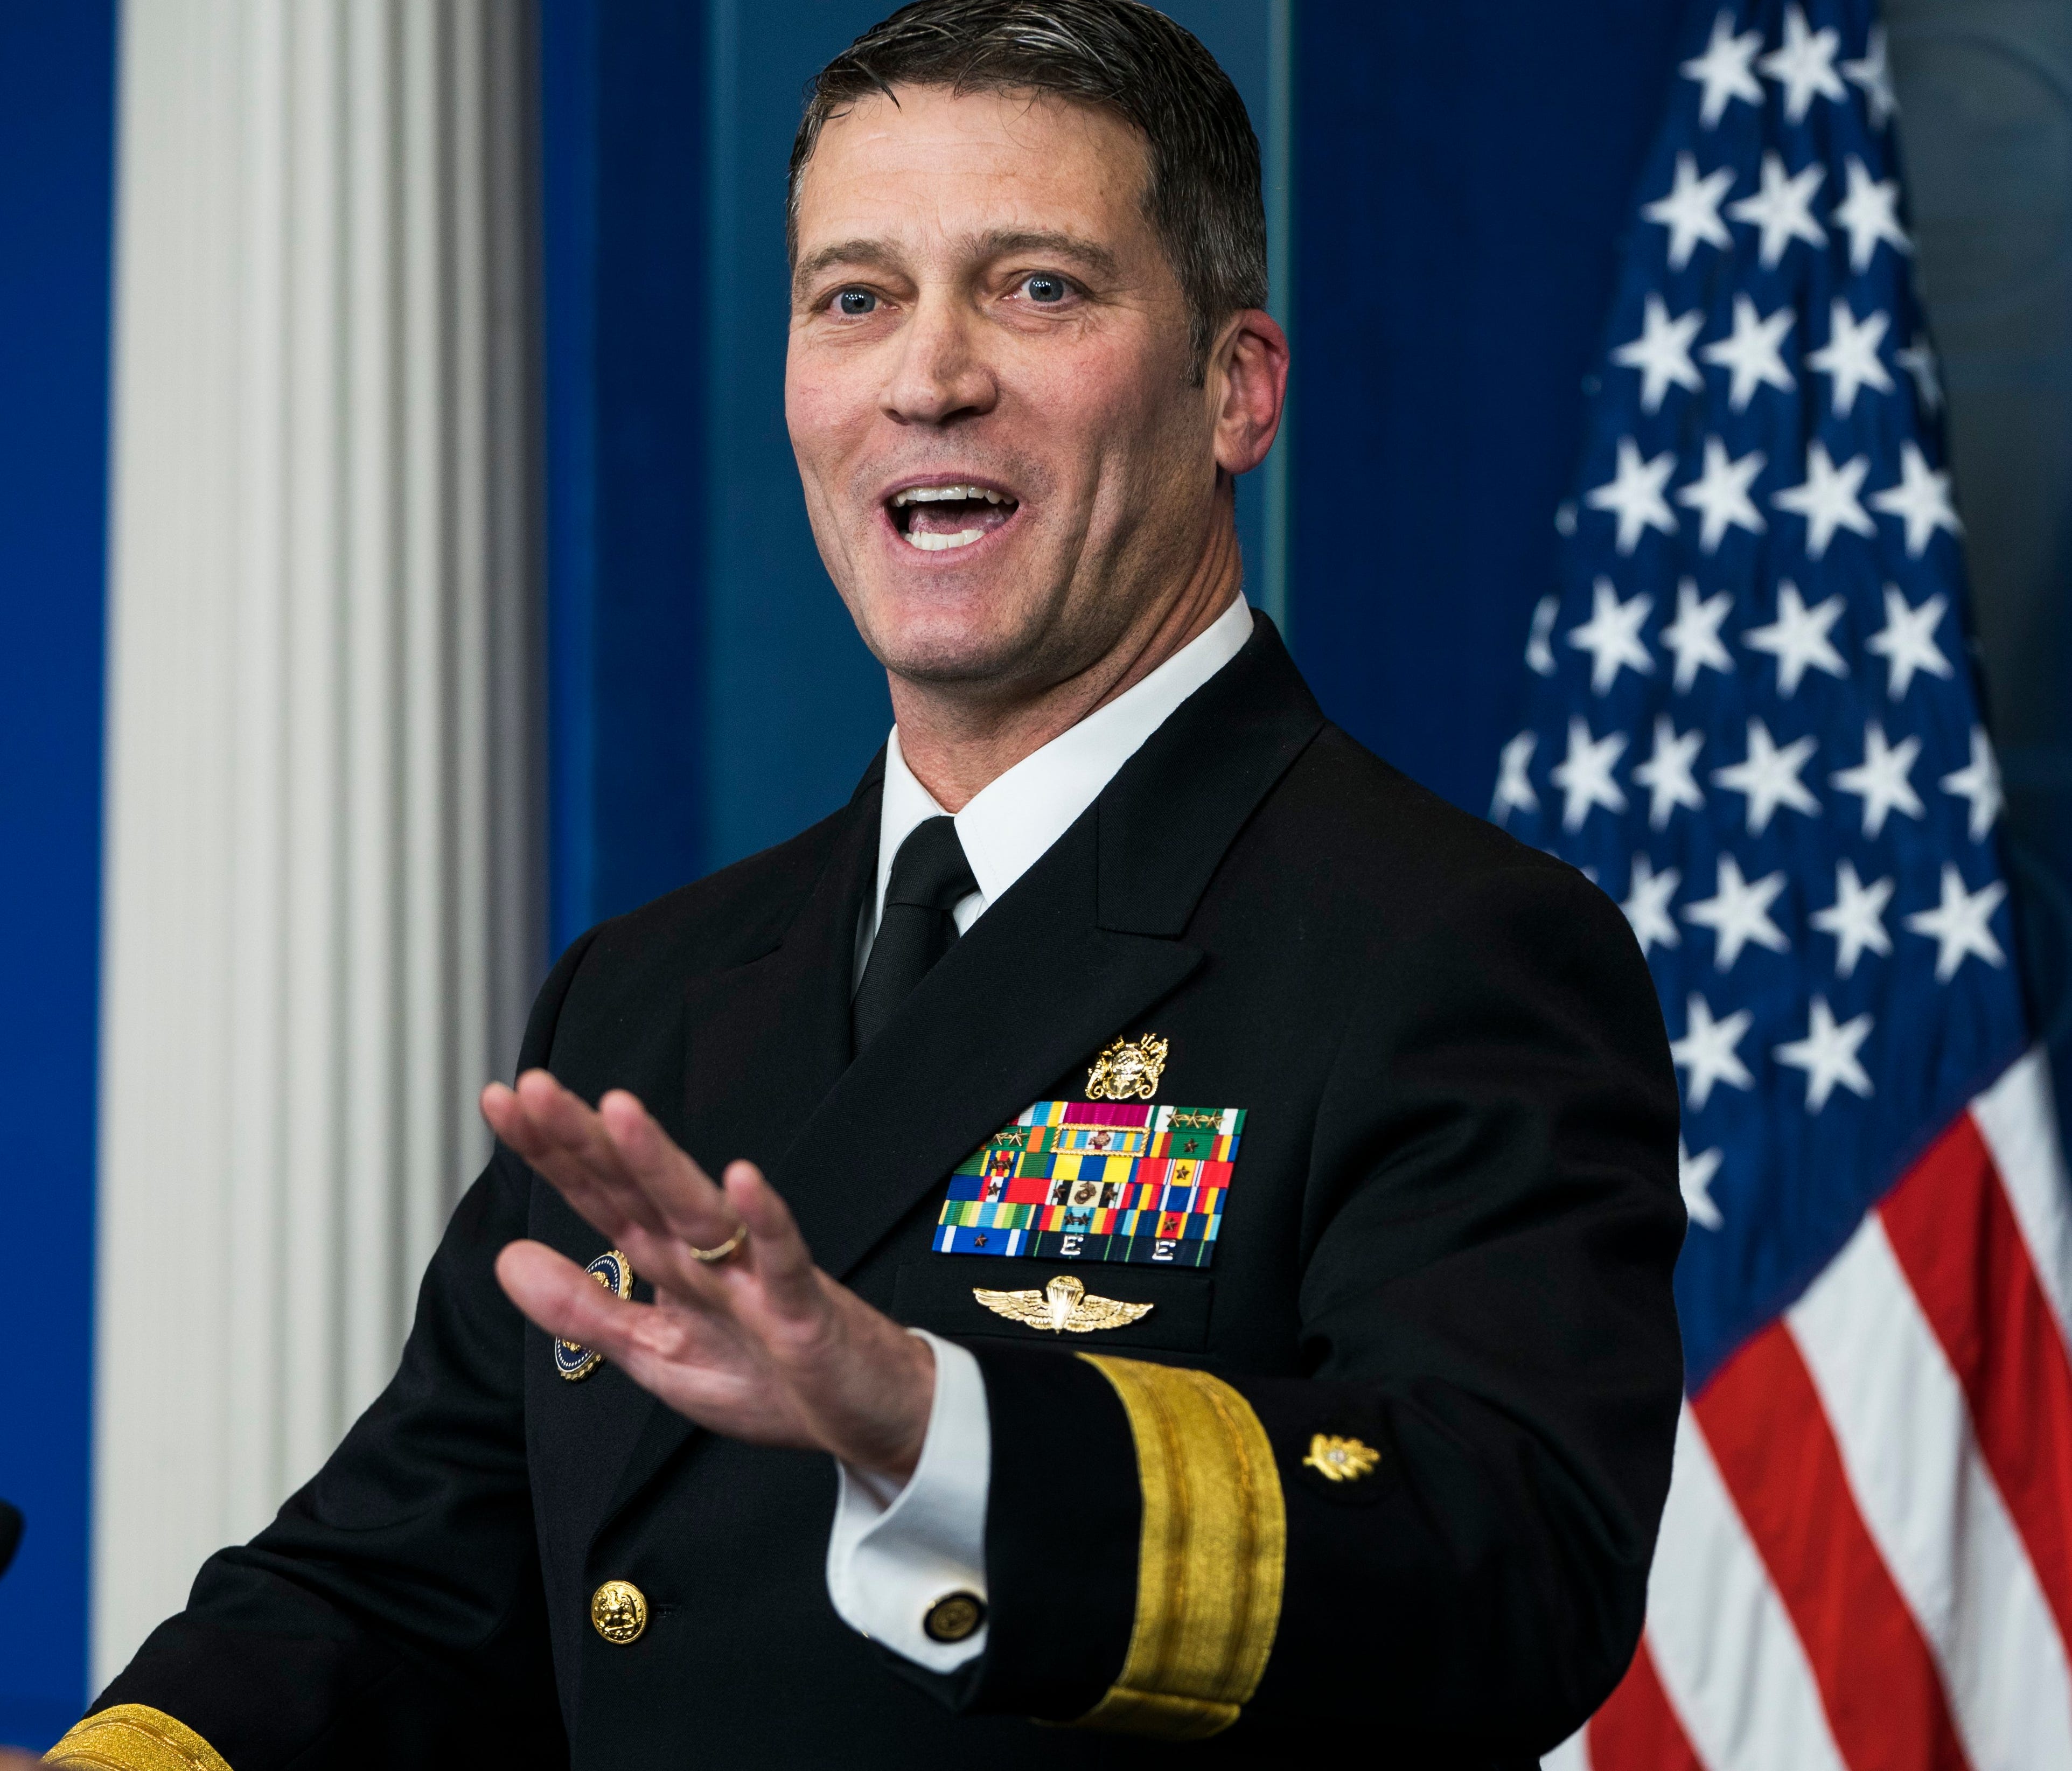 Dr. Ronny Jackson speaks about the physical exam conducted on President Trump earlier this year.